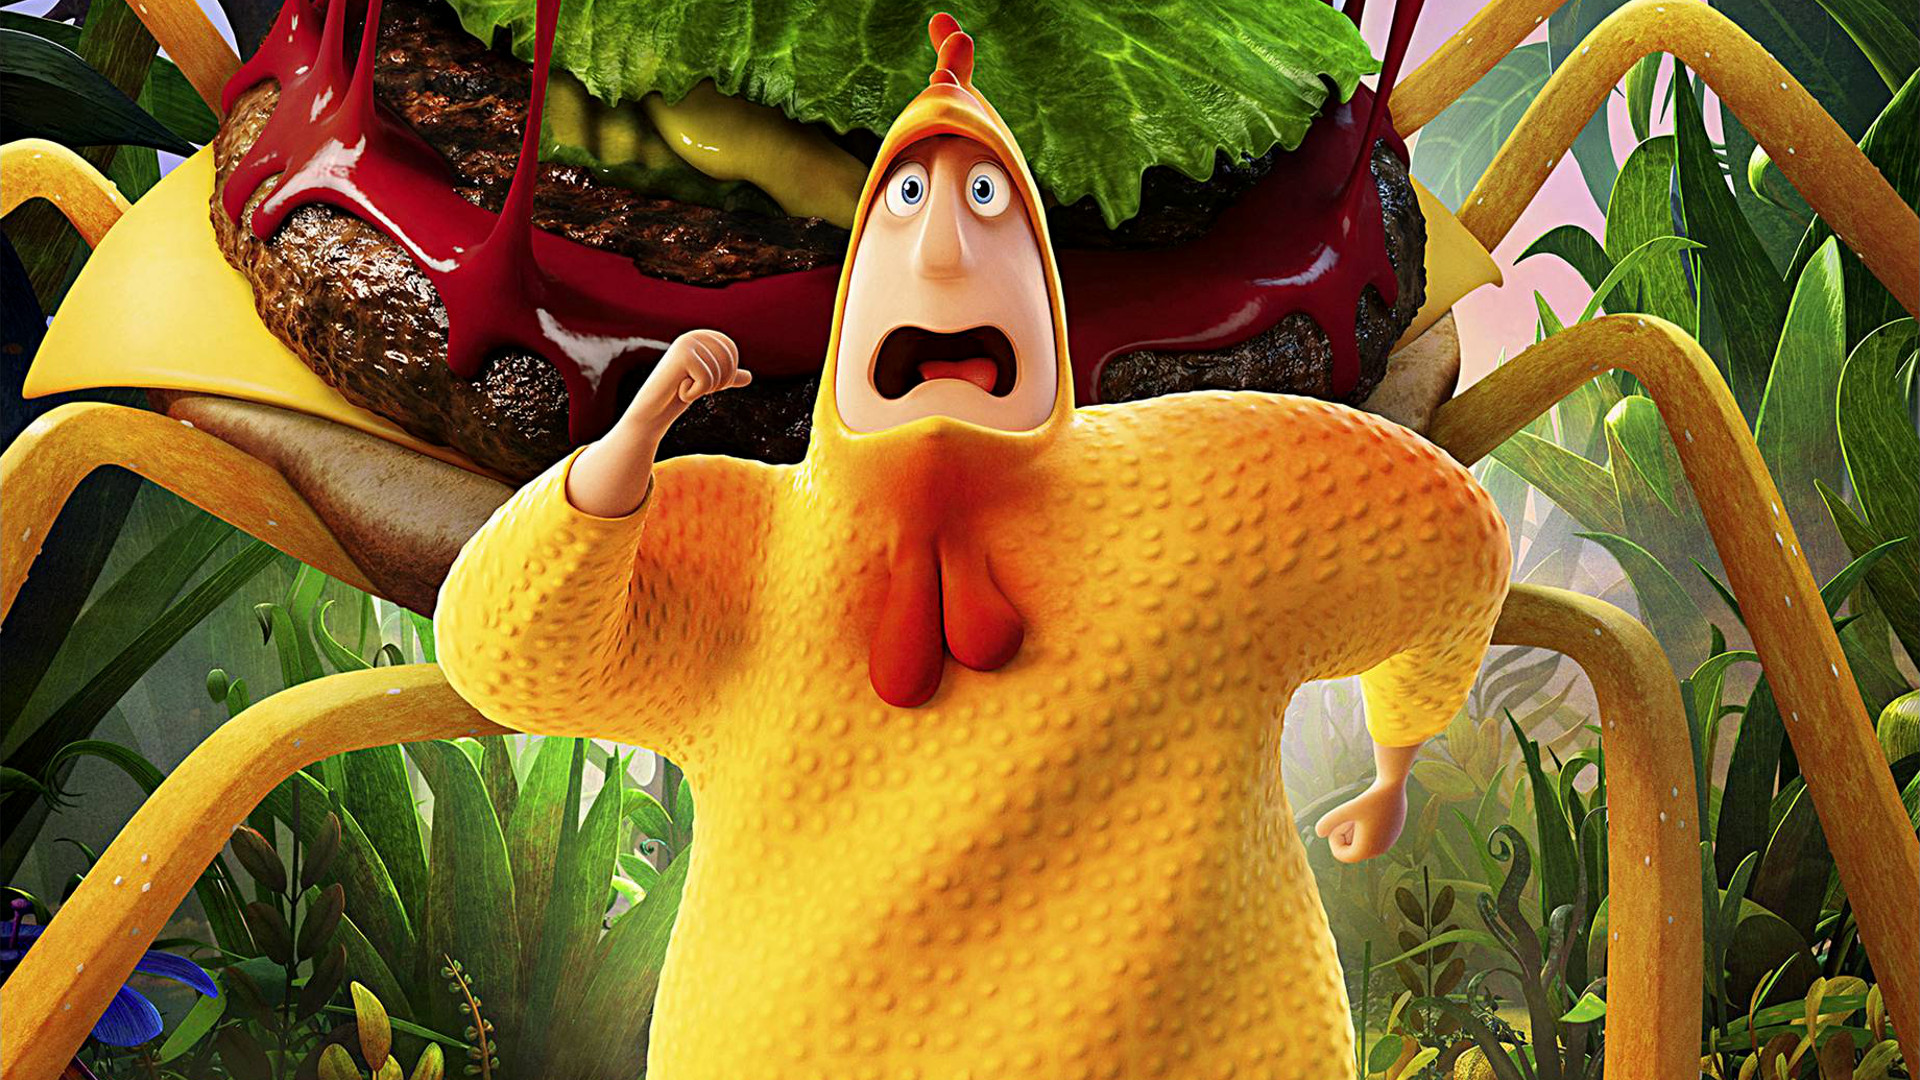 Movie Cloudy With A Chance Of Meatballs 2 1920x1080